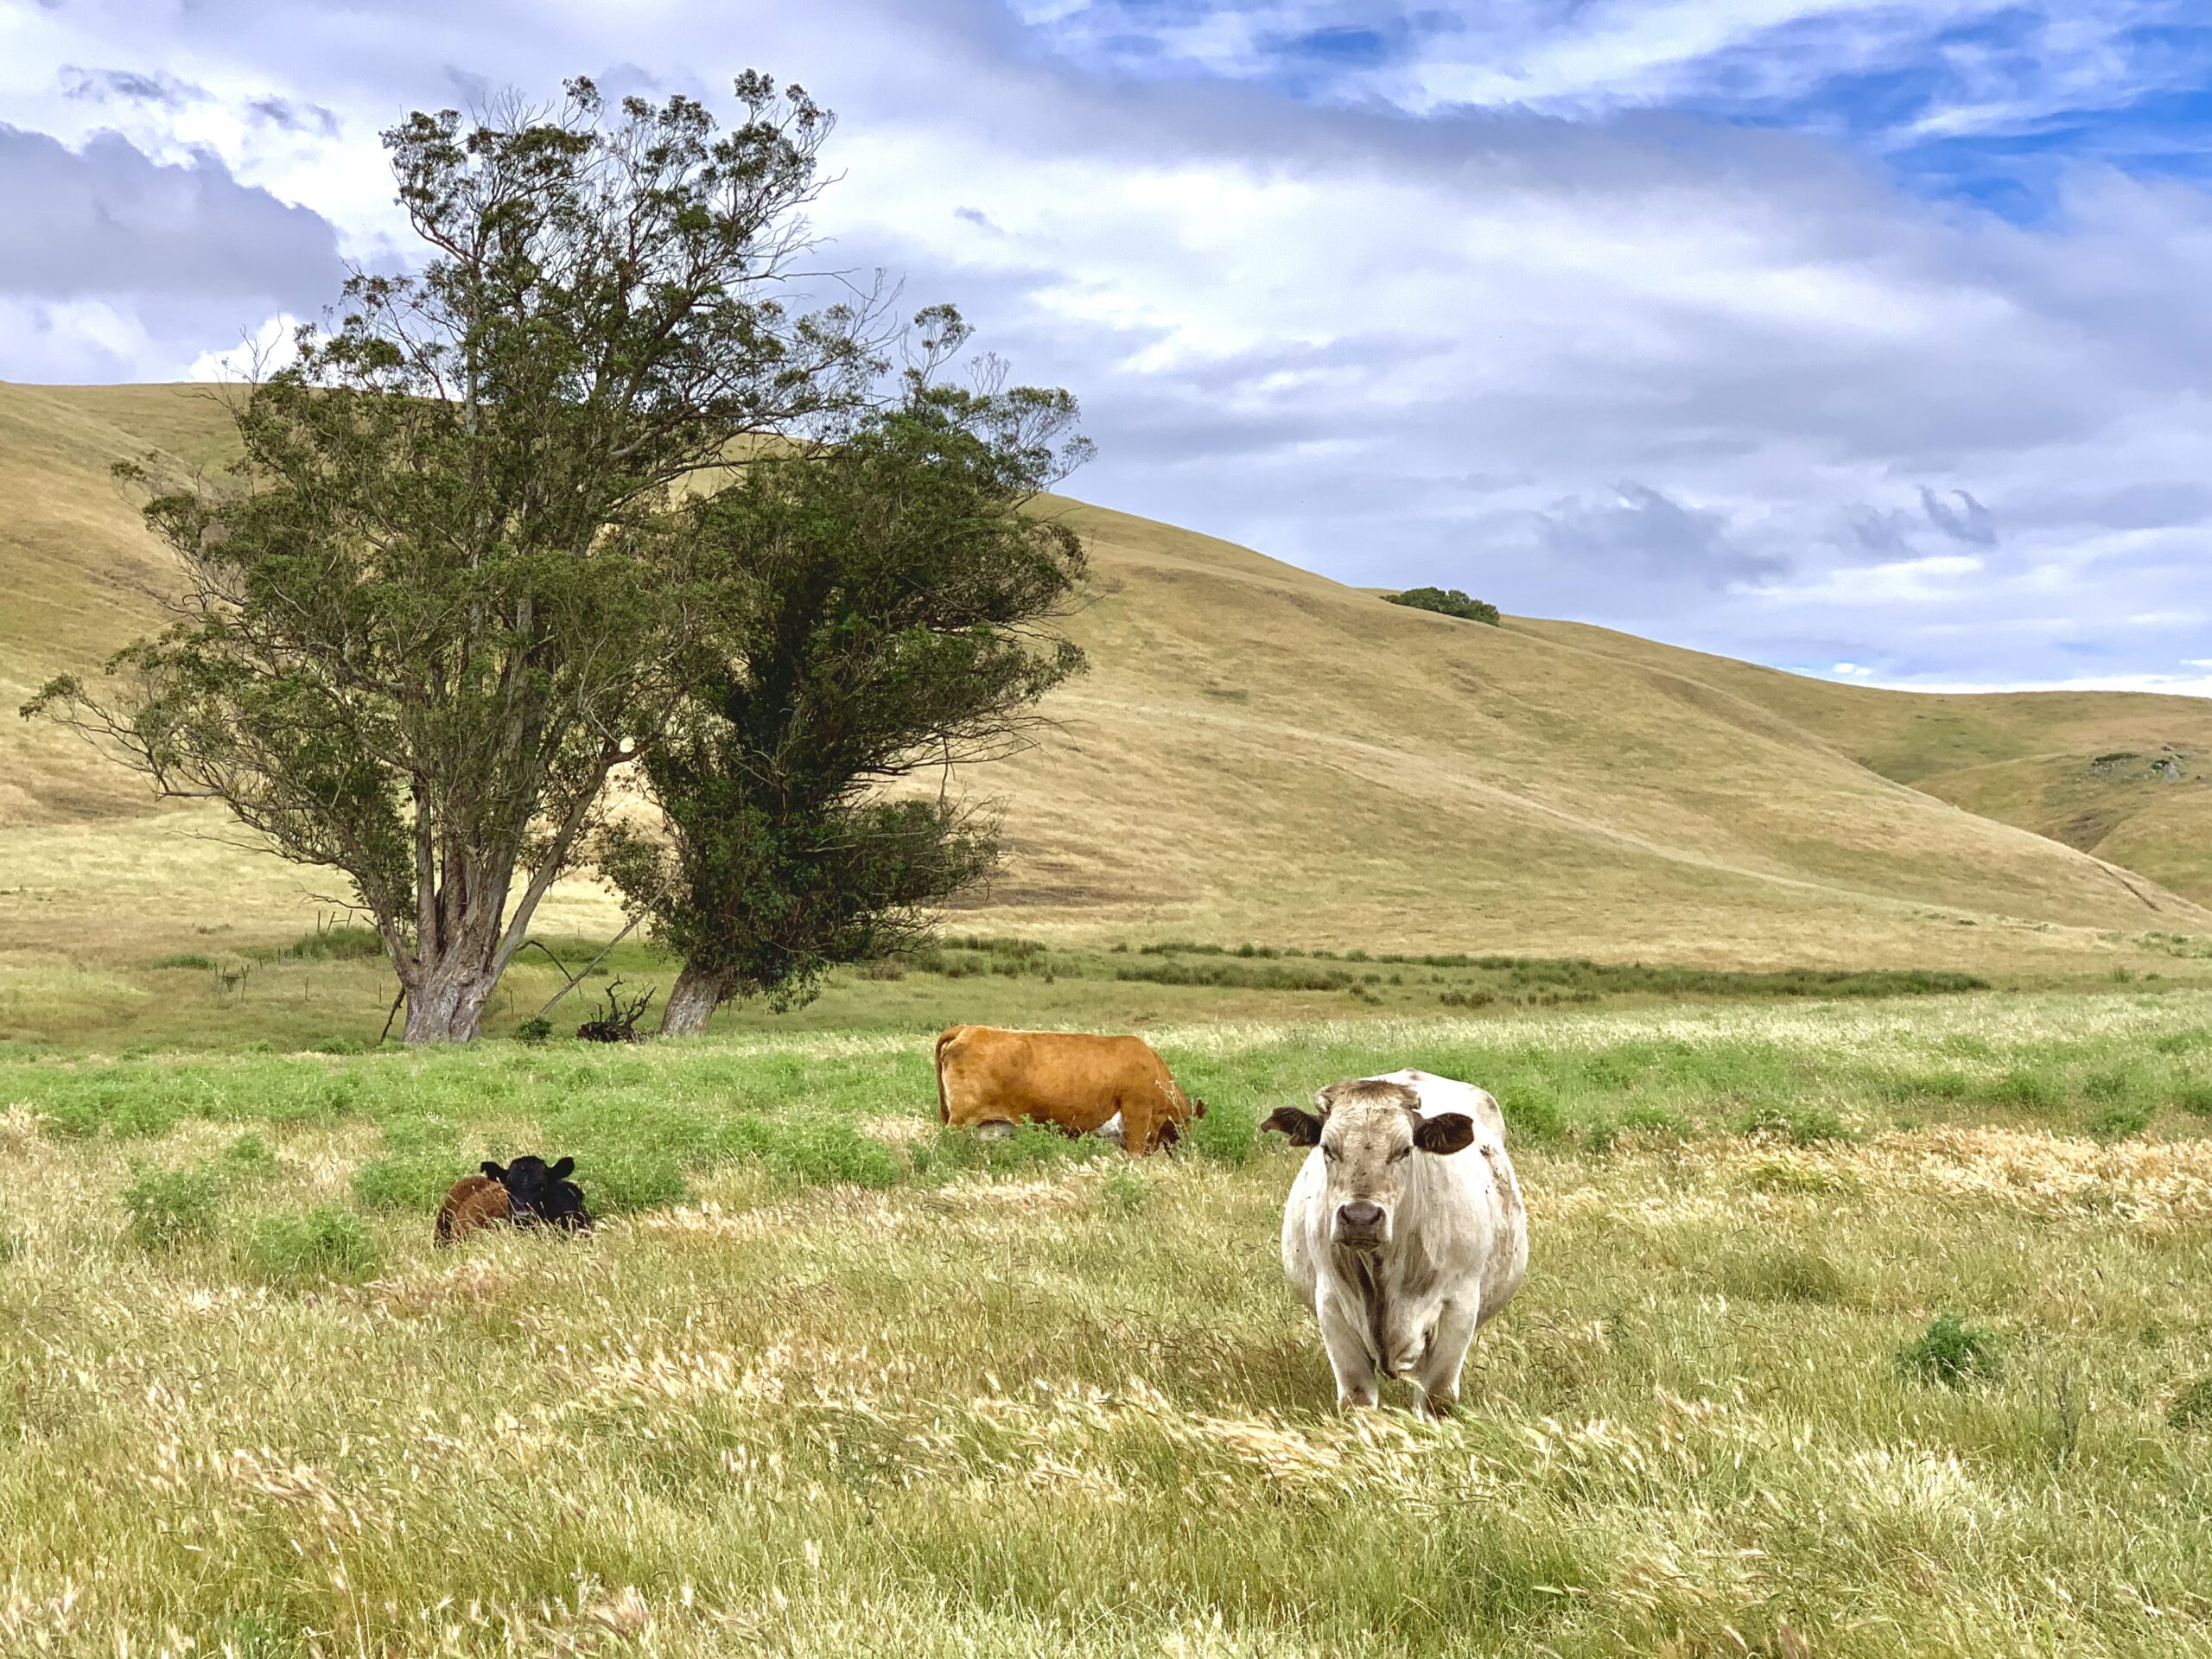 A group of cows in a grassy field.